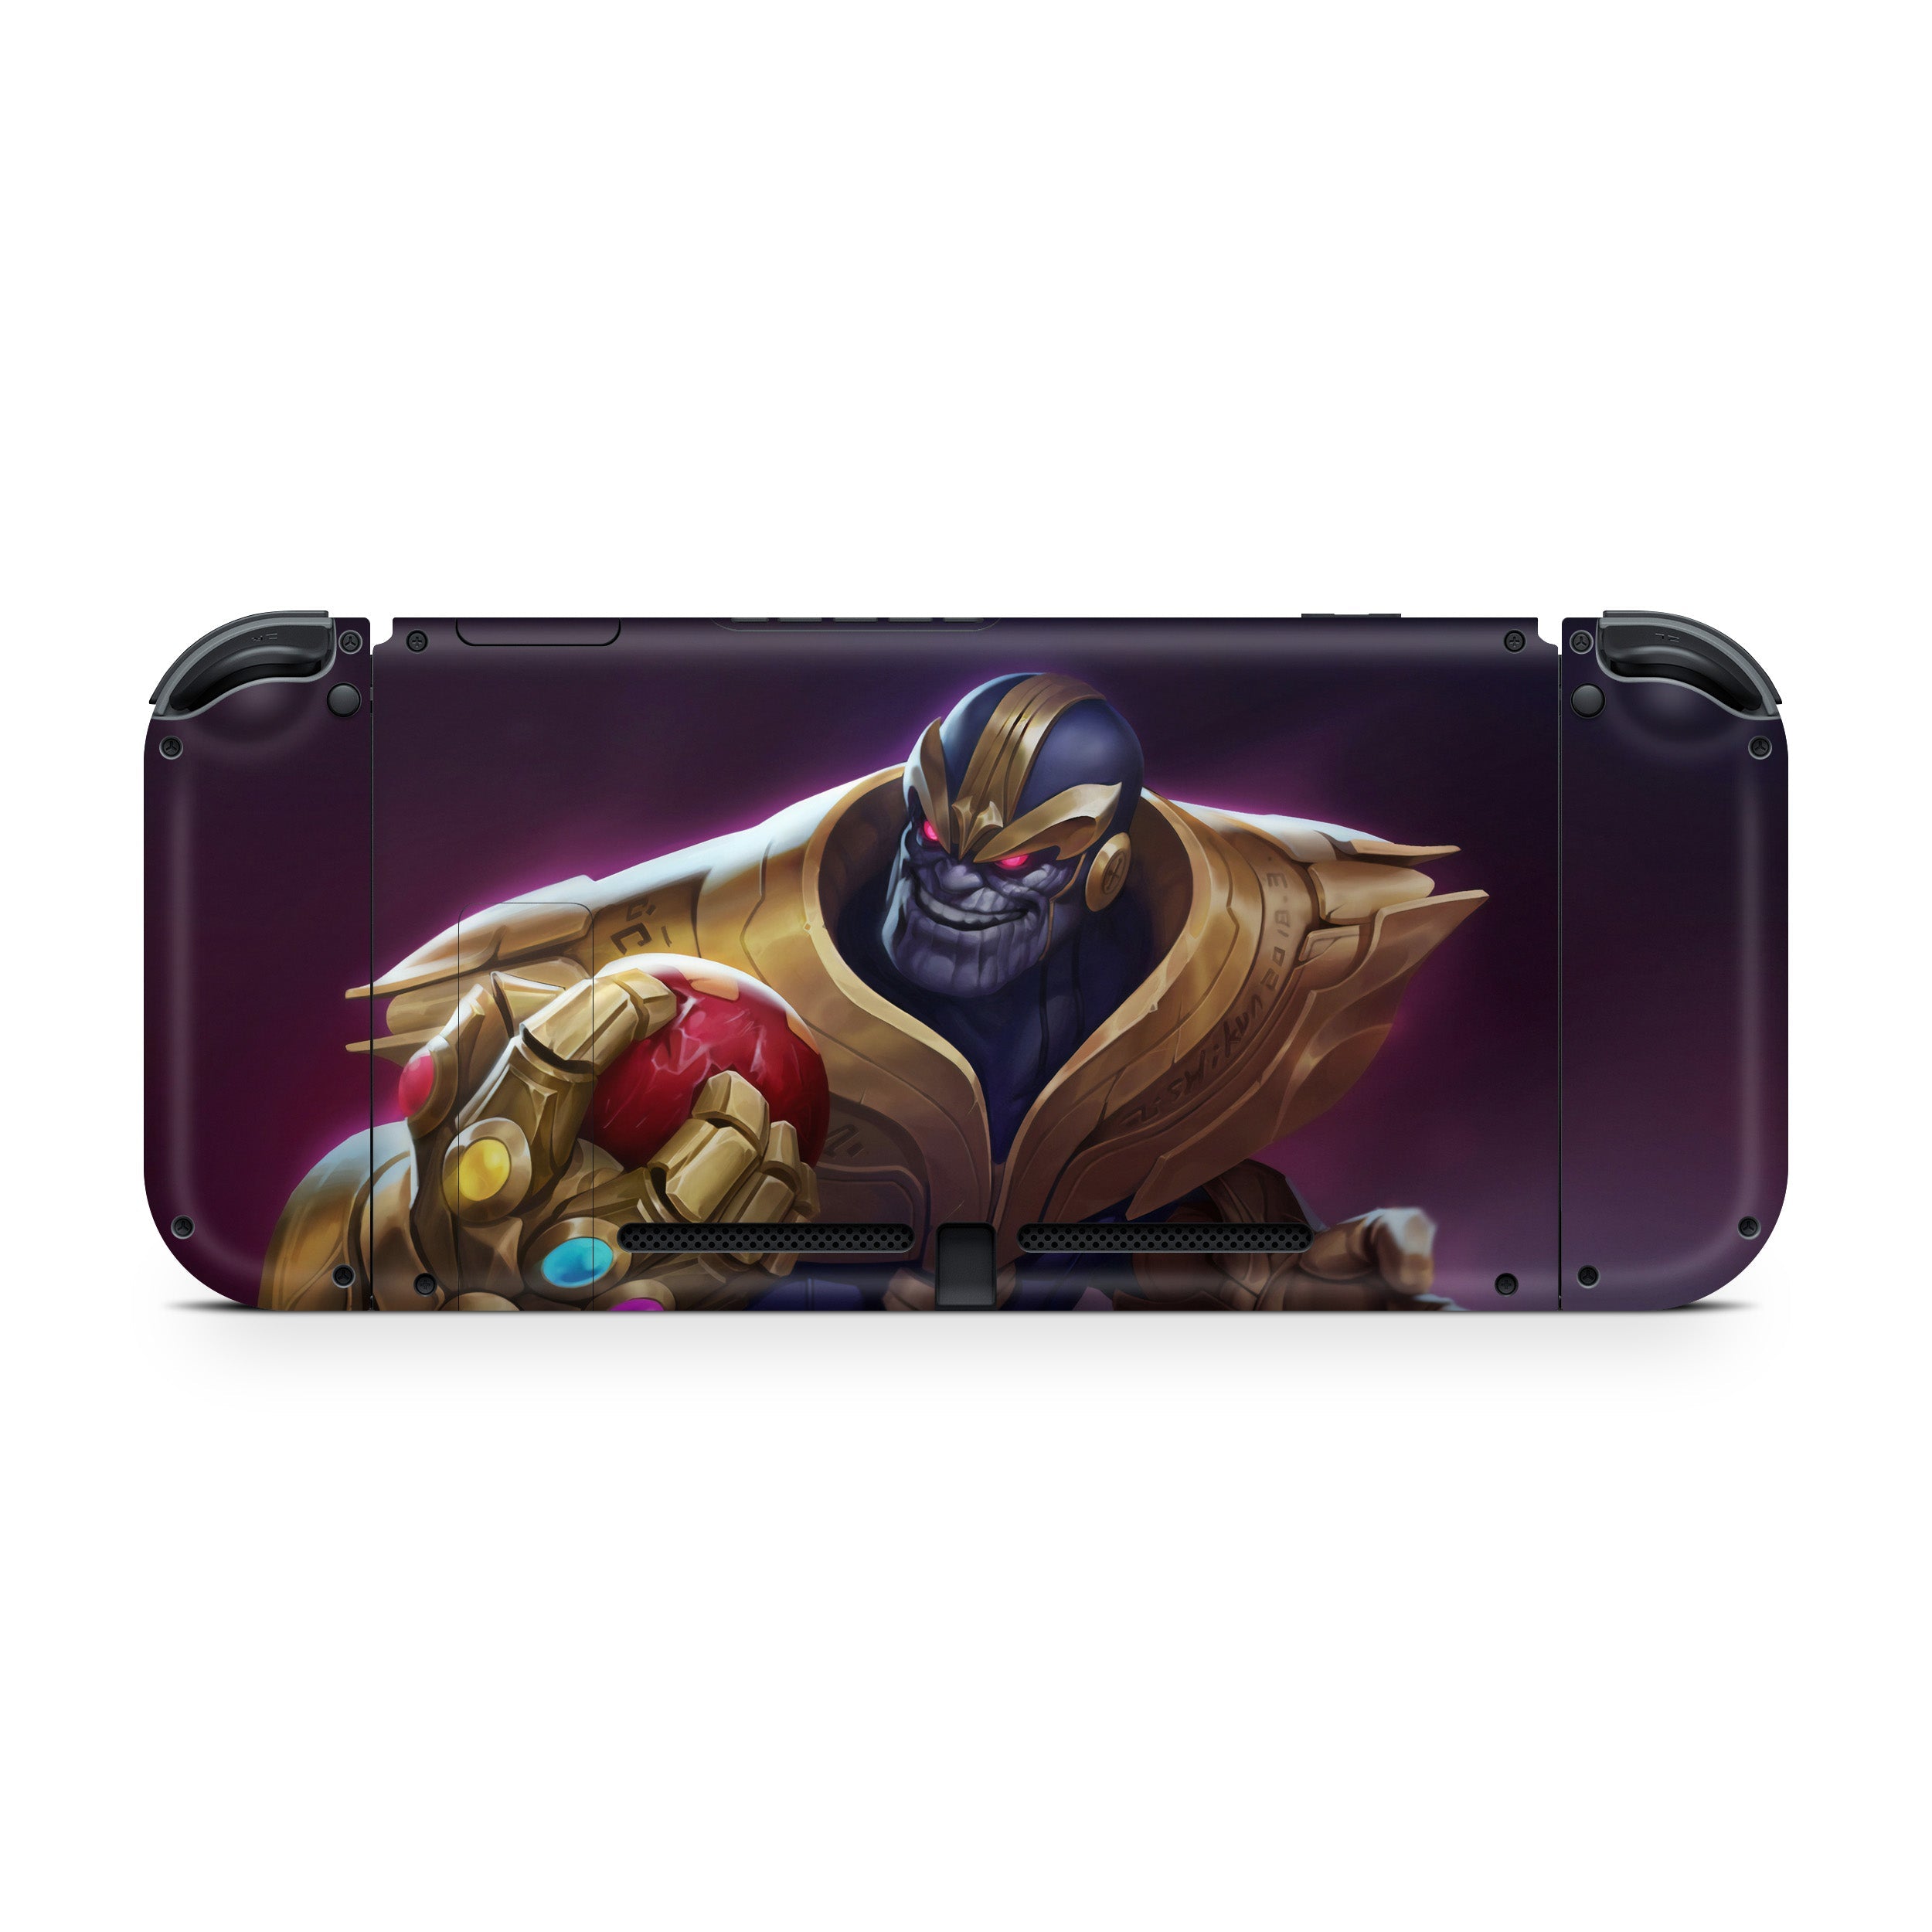 A video game skin featuring a Marvel Comics Thanos design for the Nintendo Switch.